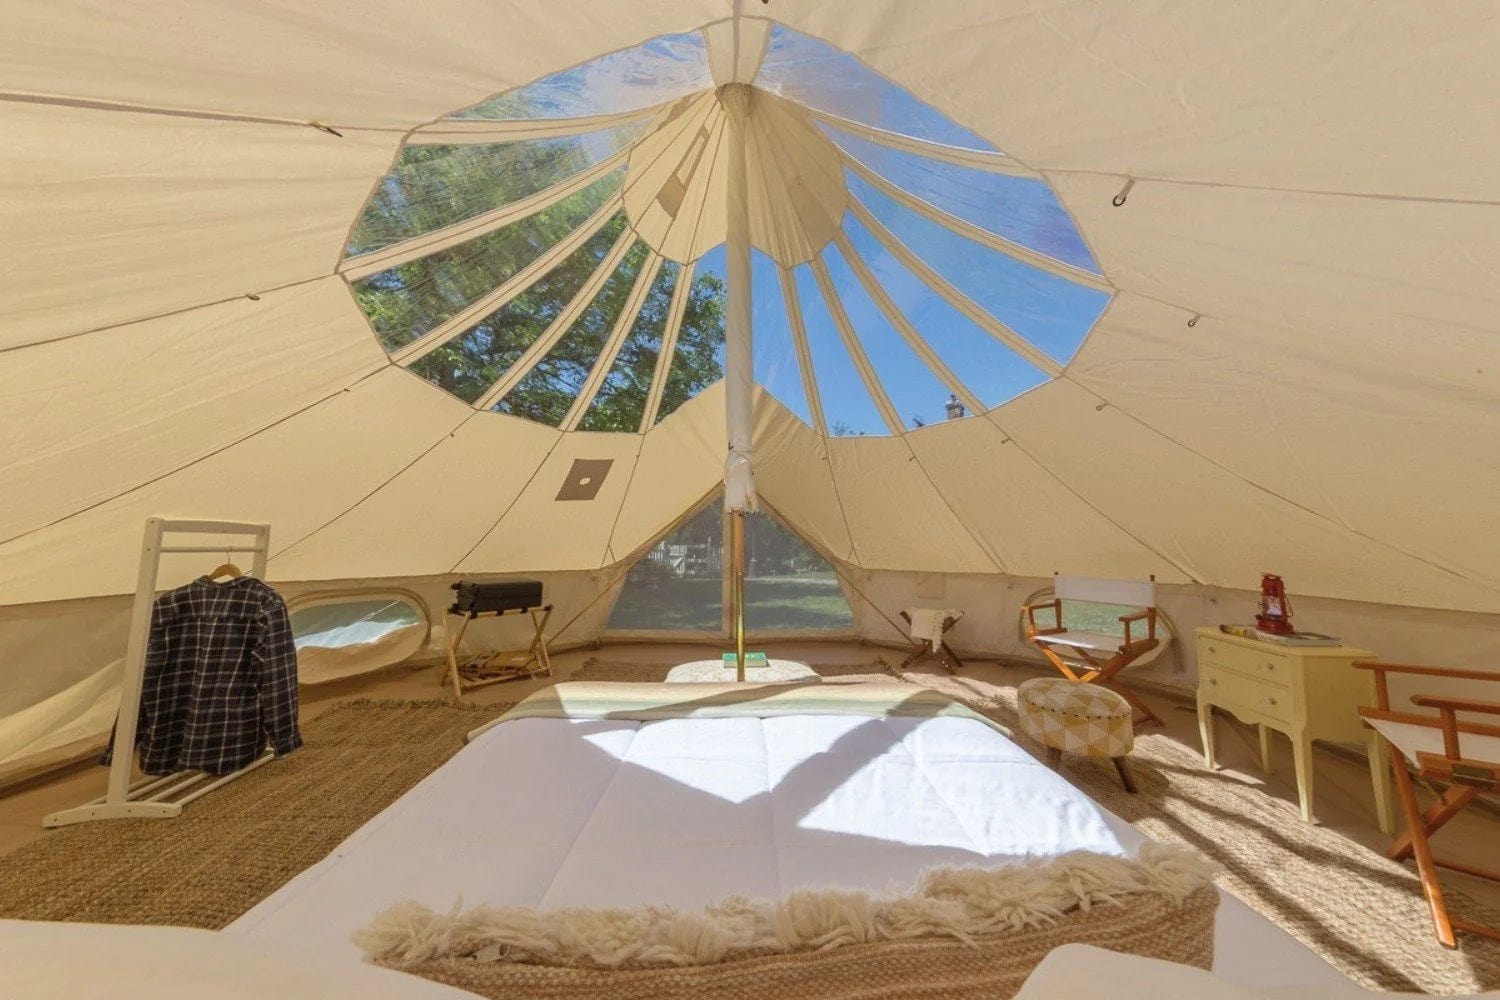 LIFE IN TENTS Bell Tents Life in Tent 20' (6M) Stella™  Stargazing Tent-LIT20SSTL